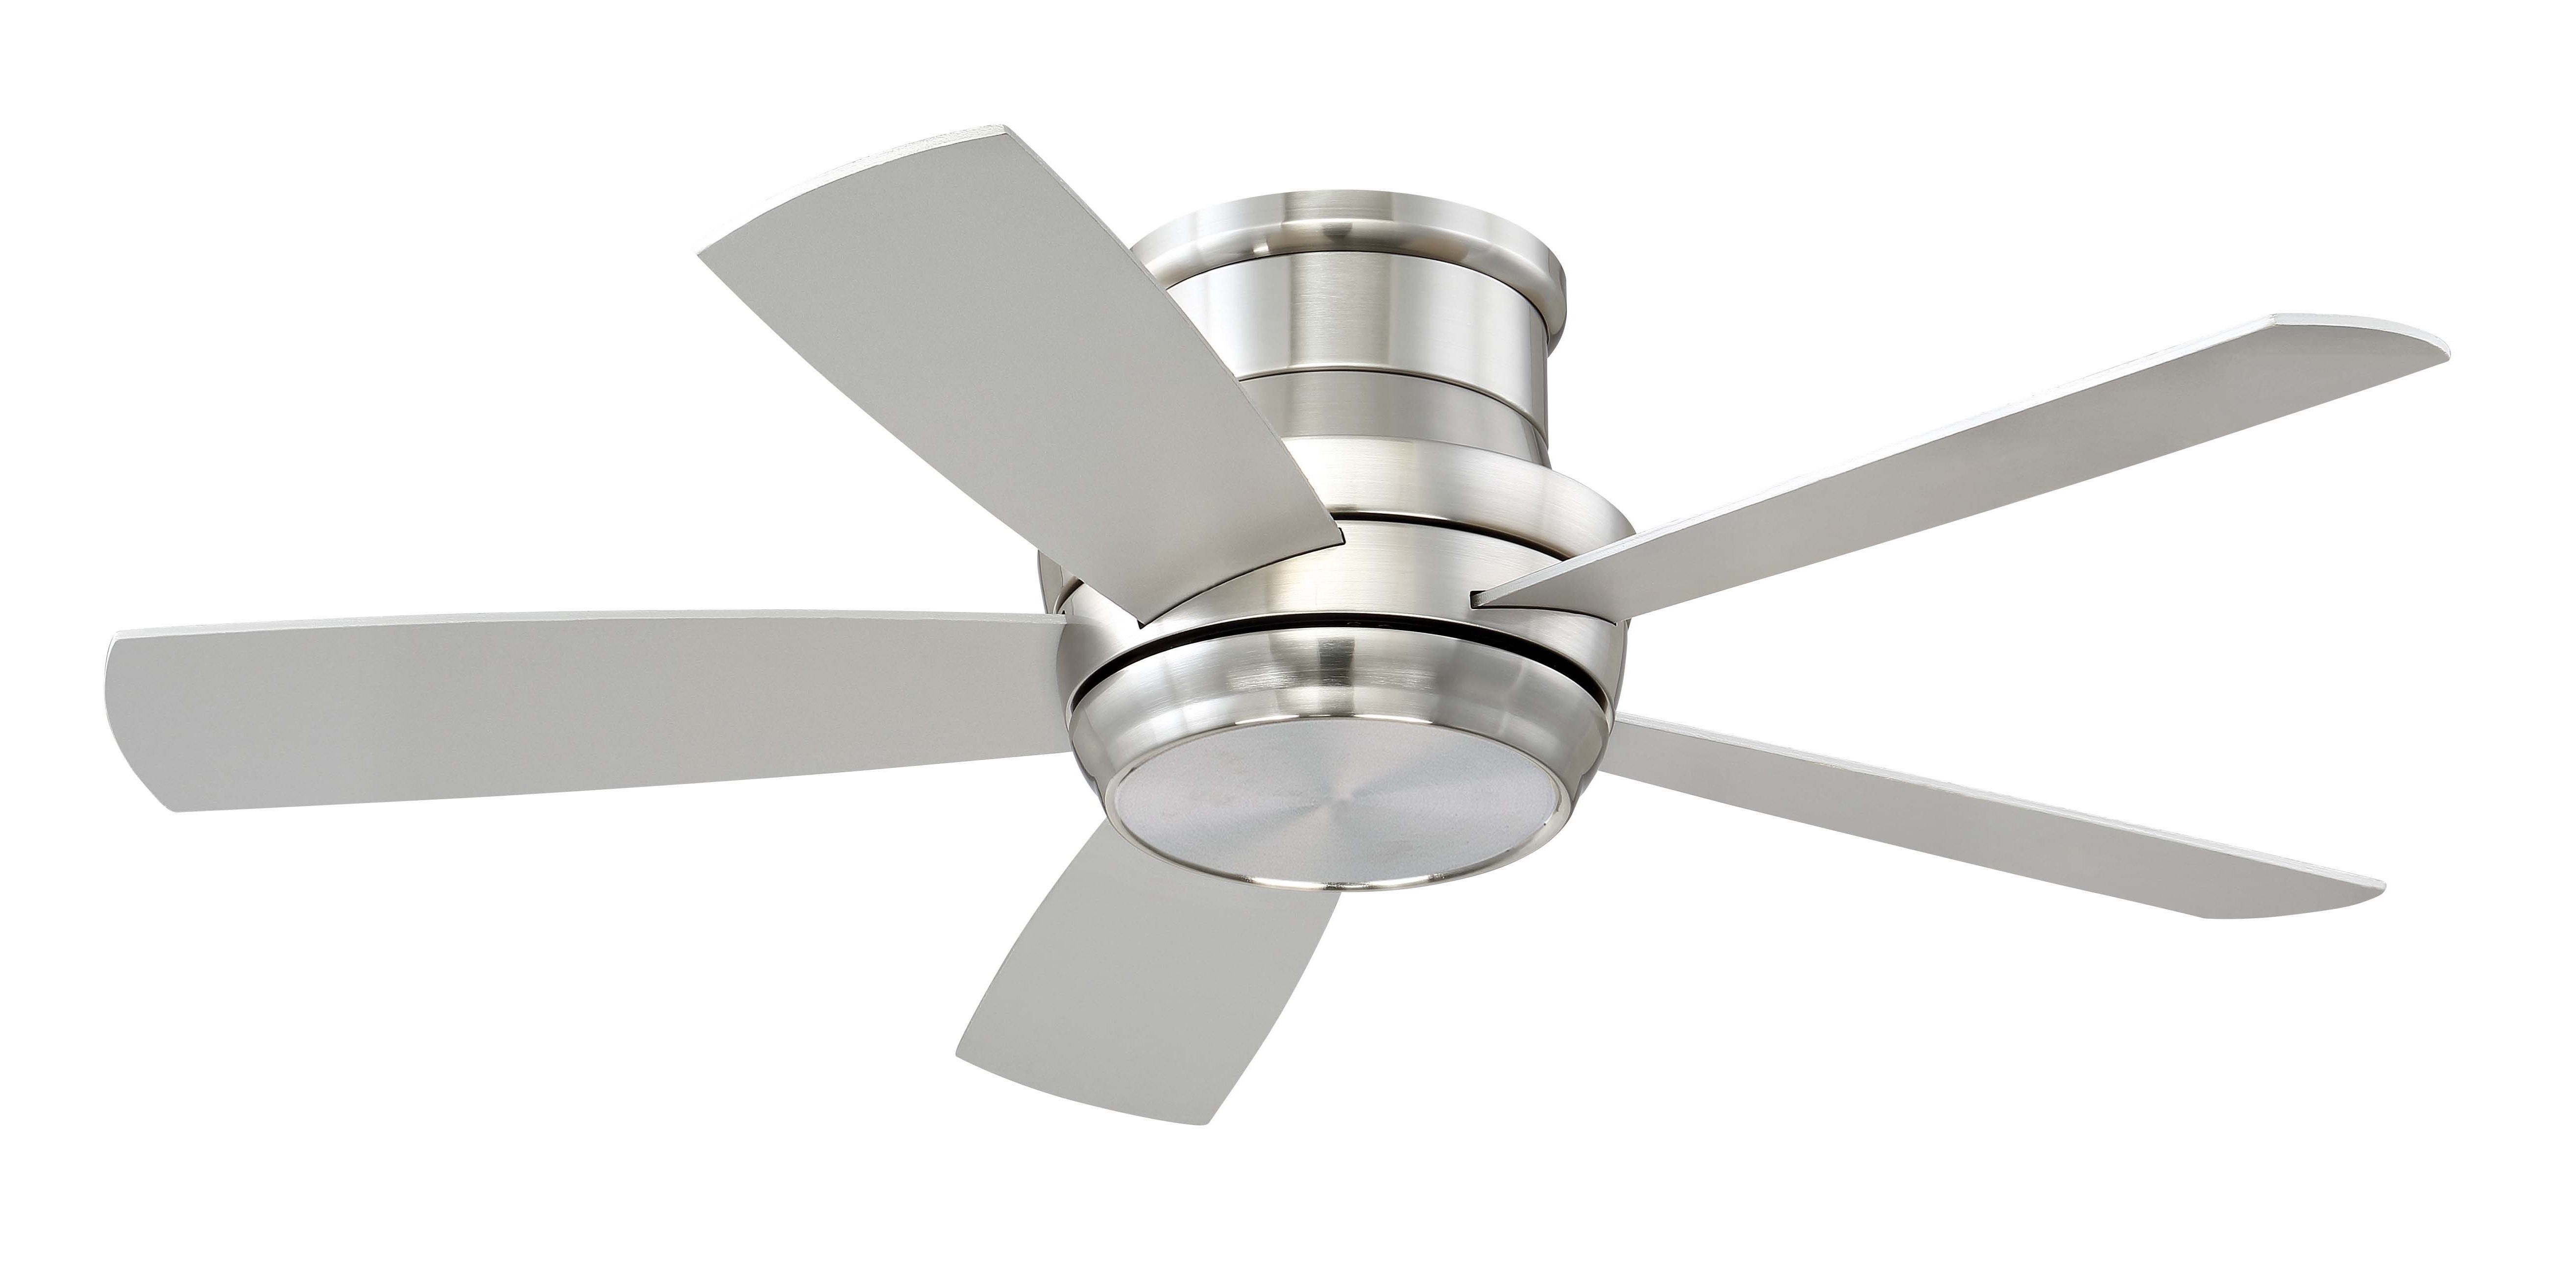 Cedarton Hugger 5 Blade Led Ceiling Fans With Most Popular 44" Cedarton Hugger 5 Blade Led Ceiling Fan, Light Kit Included (Photo 4 of 20)